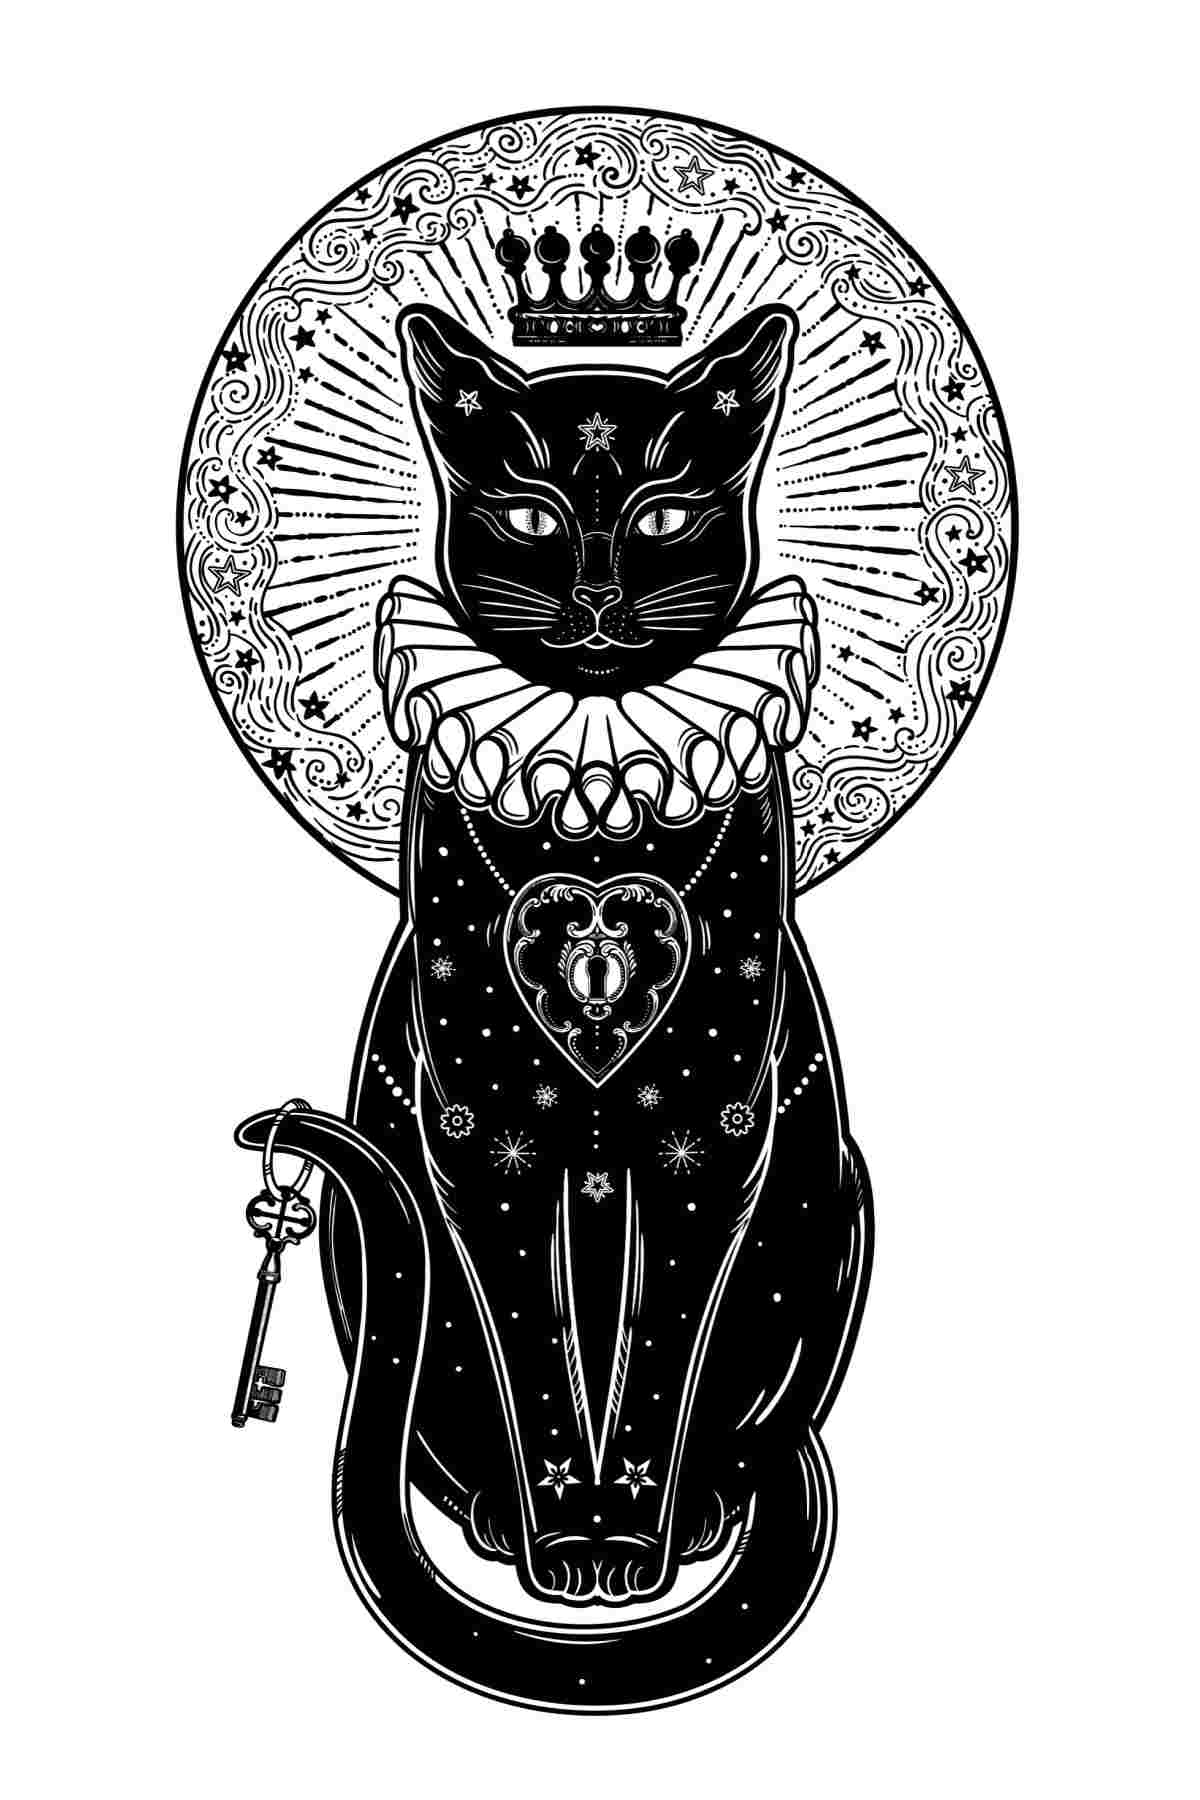 A black cat wearing a pleated ruff around its neck, a crown on its head, and necklace with a heart shaped locket around its neck, the cat has a kingly appearance which emulates The King of the Cats named Tim Tildrum.